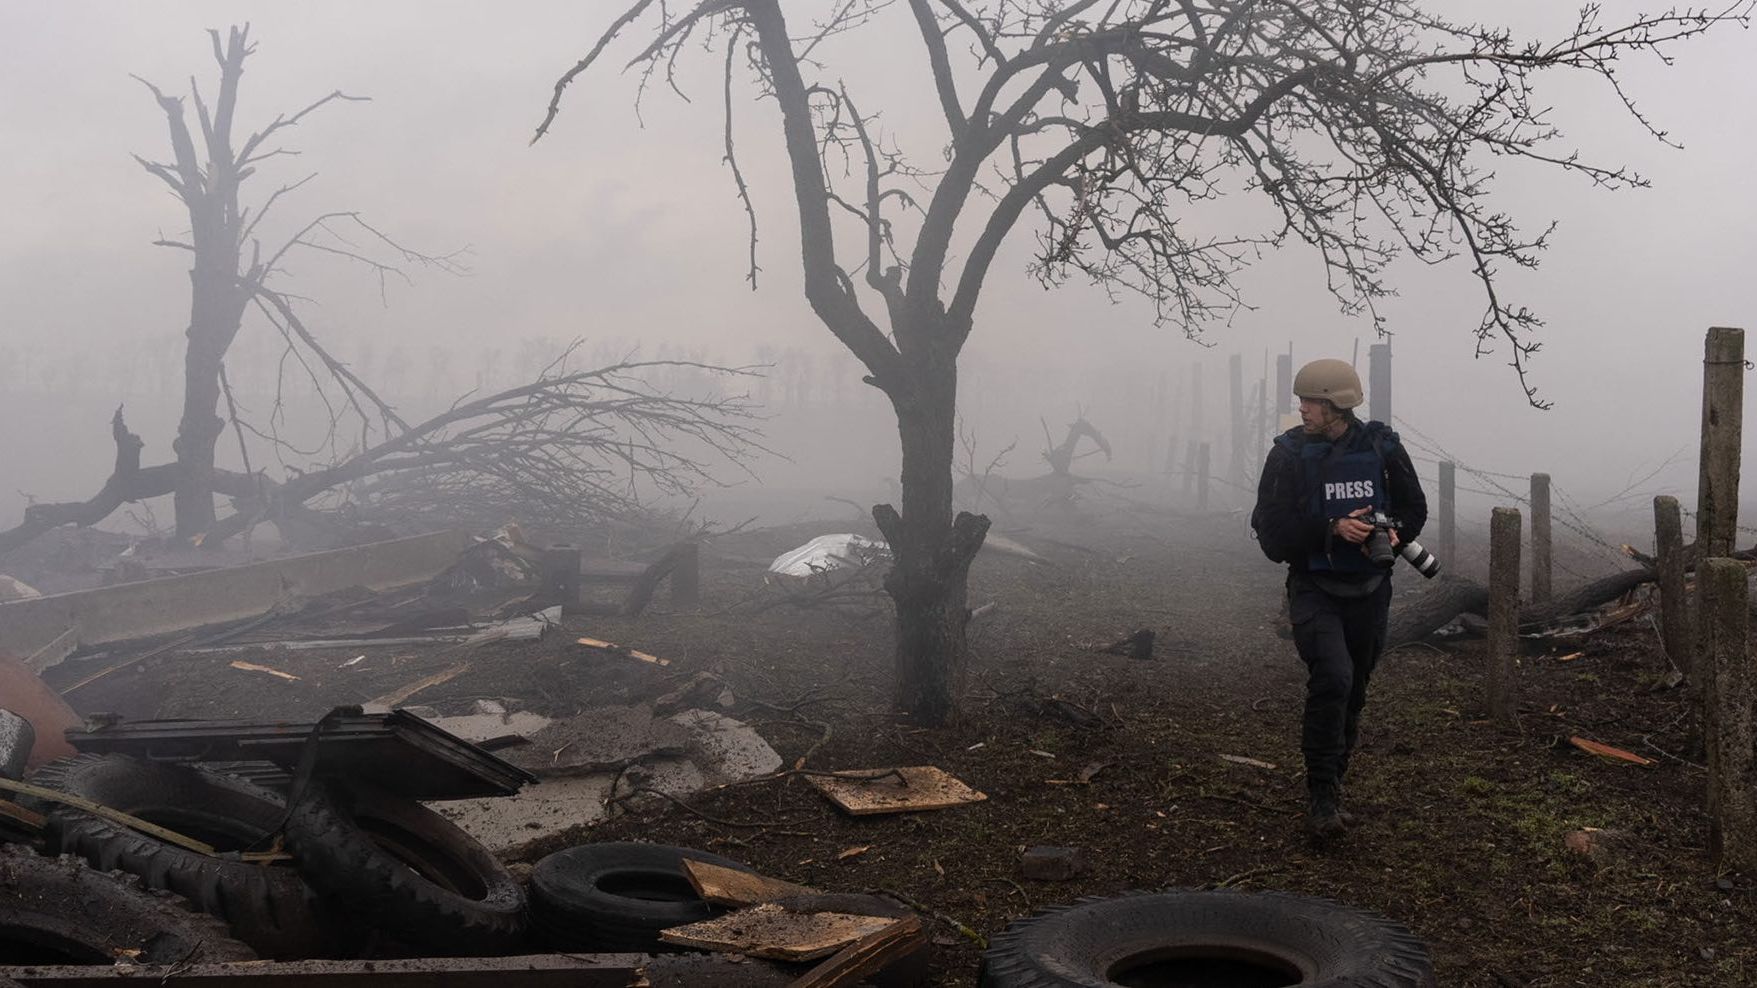 Evgeniy Maloletka bears witness with his camera to the wages of war in 20 Days in Mariupol / Photo: AP Photo by Mstyslav Chernov. courtesy of Sundance Institute